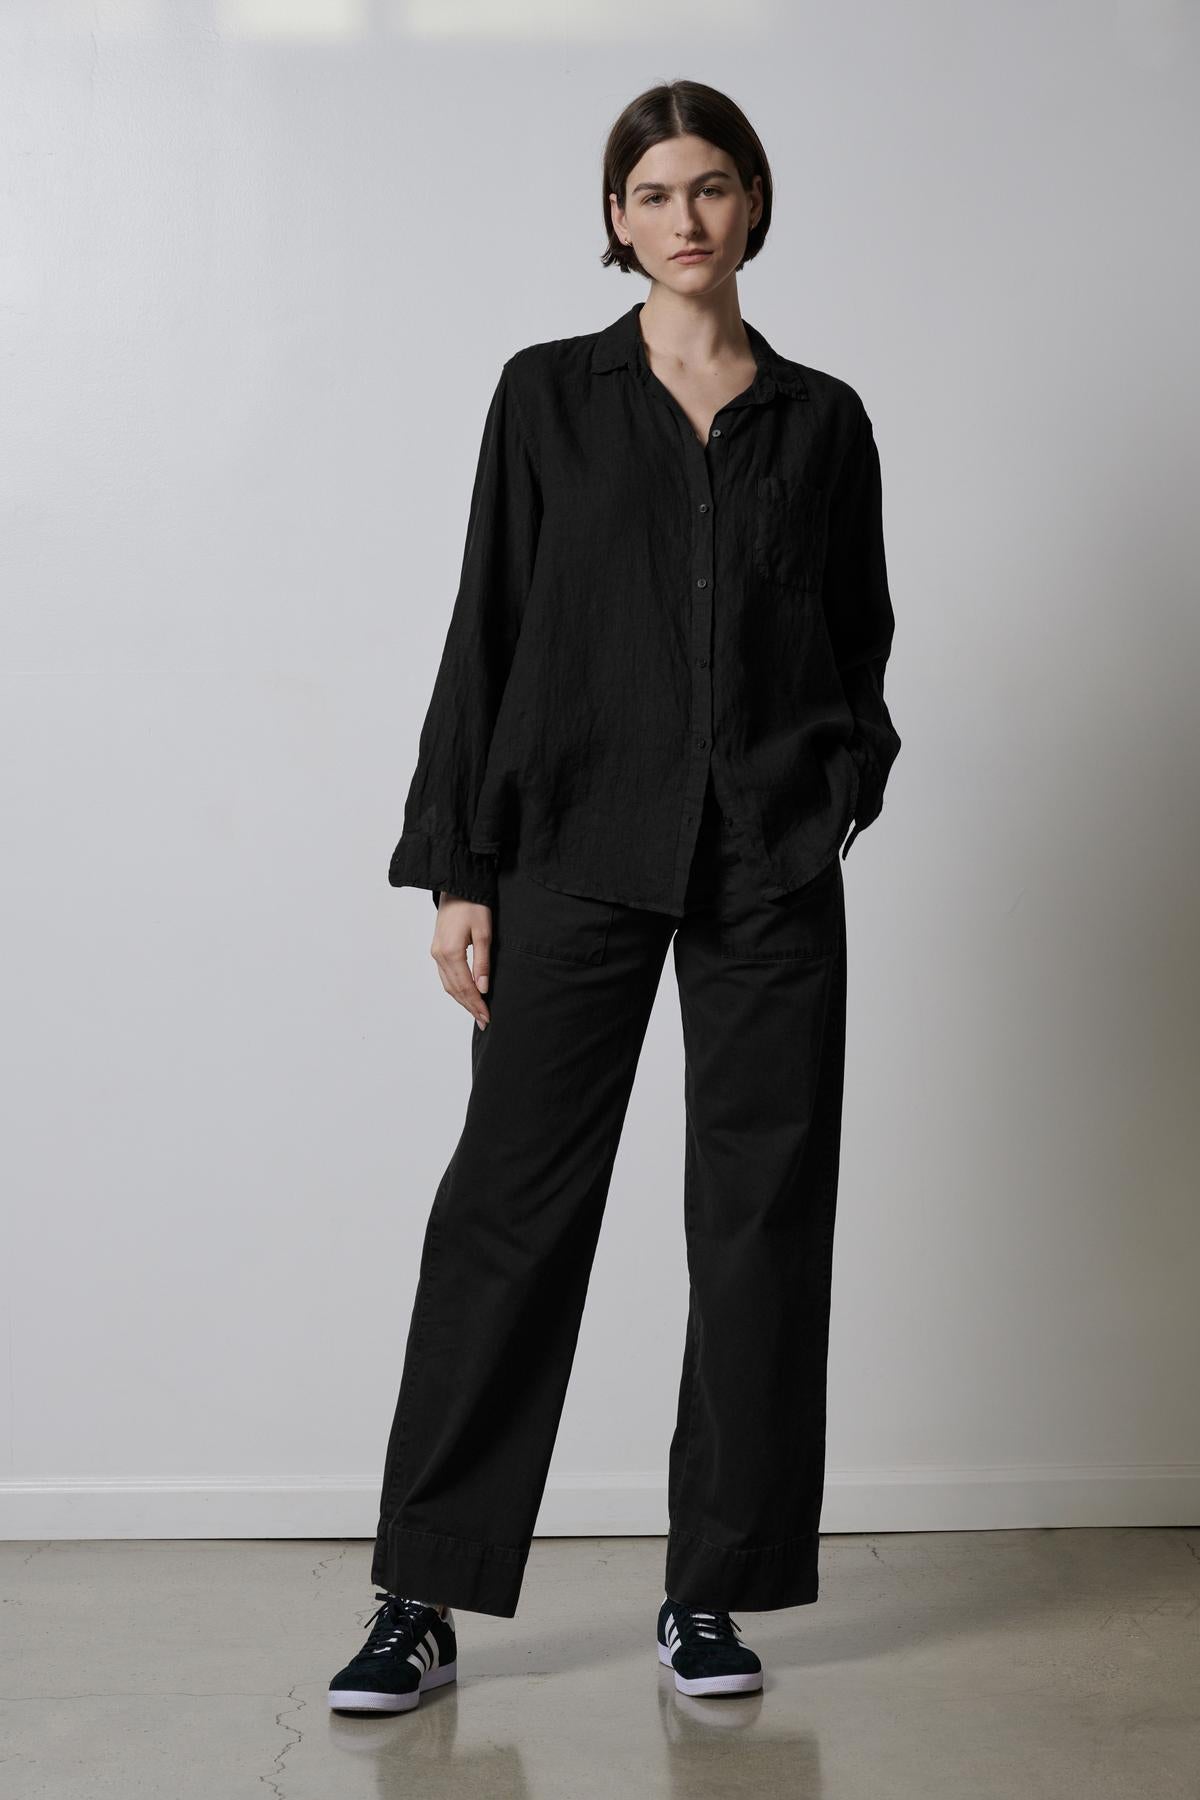 A woman is standing in a room wearing black VENTURA PANT by Velvet by Jenny Graham.-35783209681089